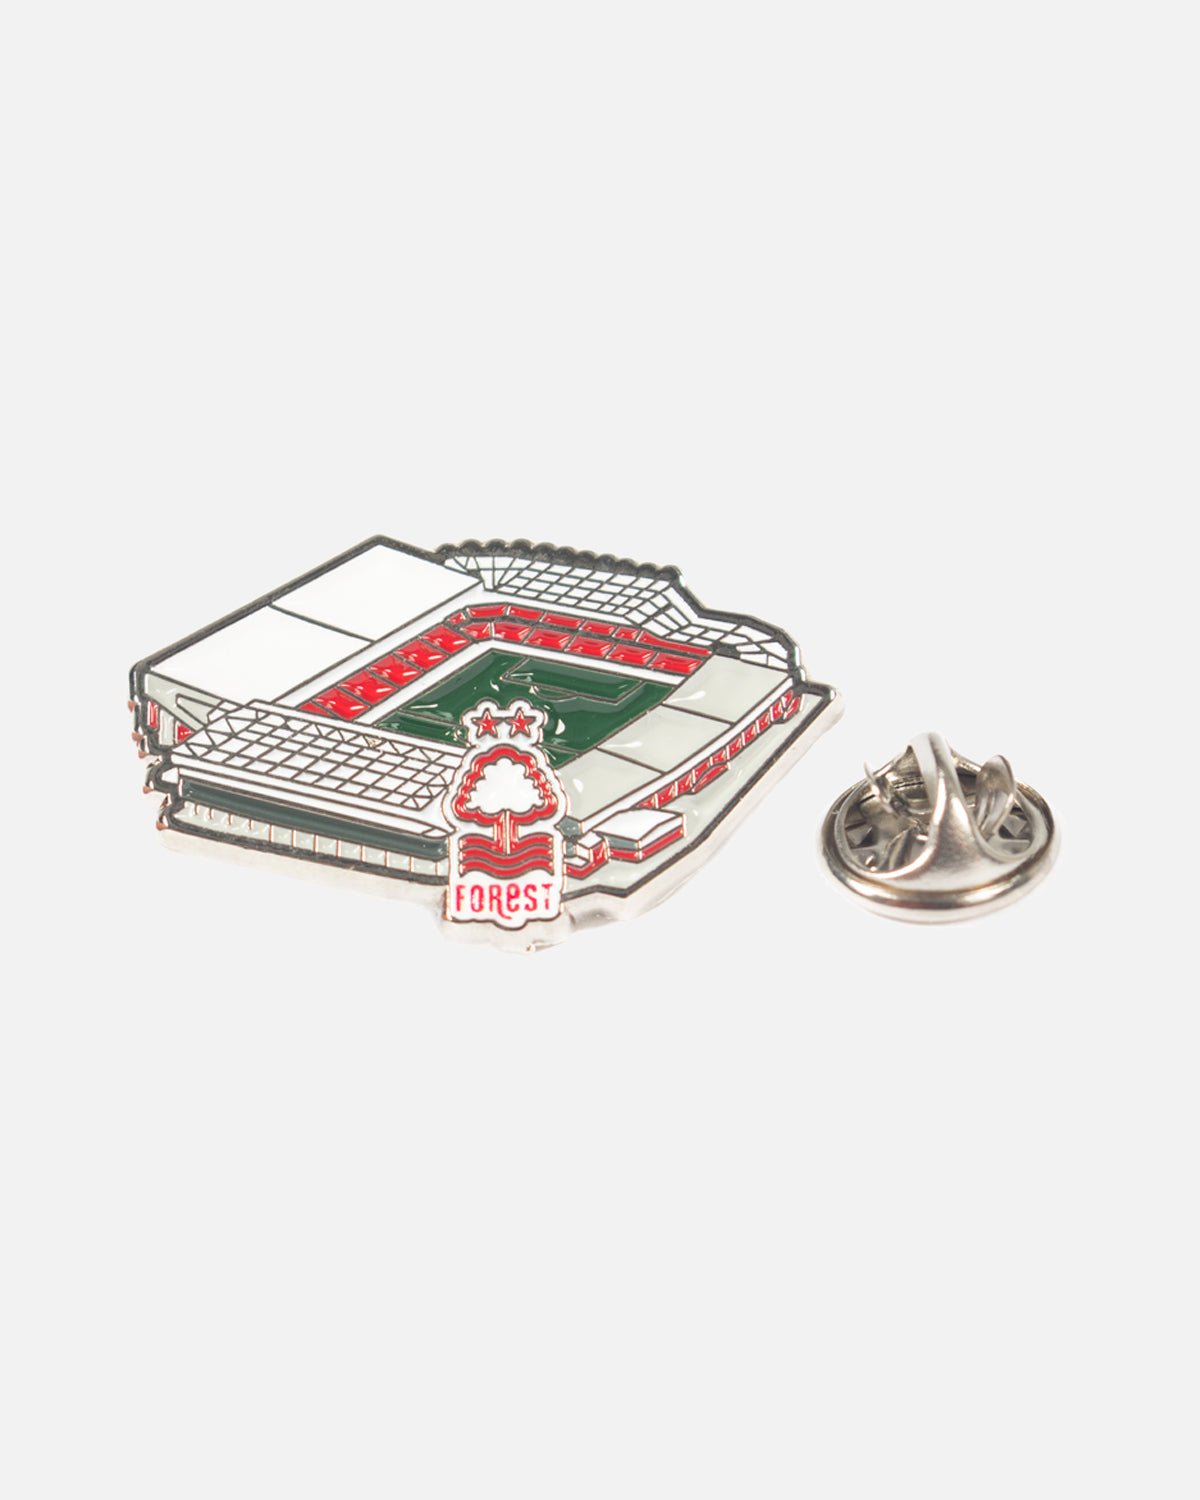 NFFC City Ground Pin Badge - Nottingham Forest FC